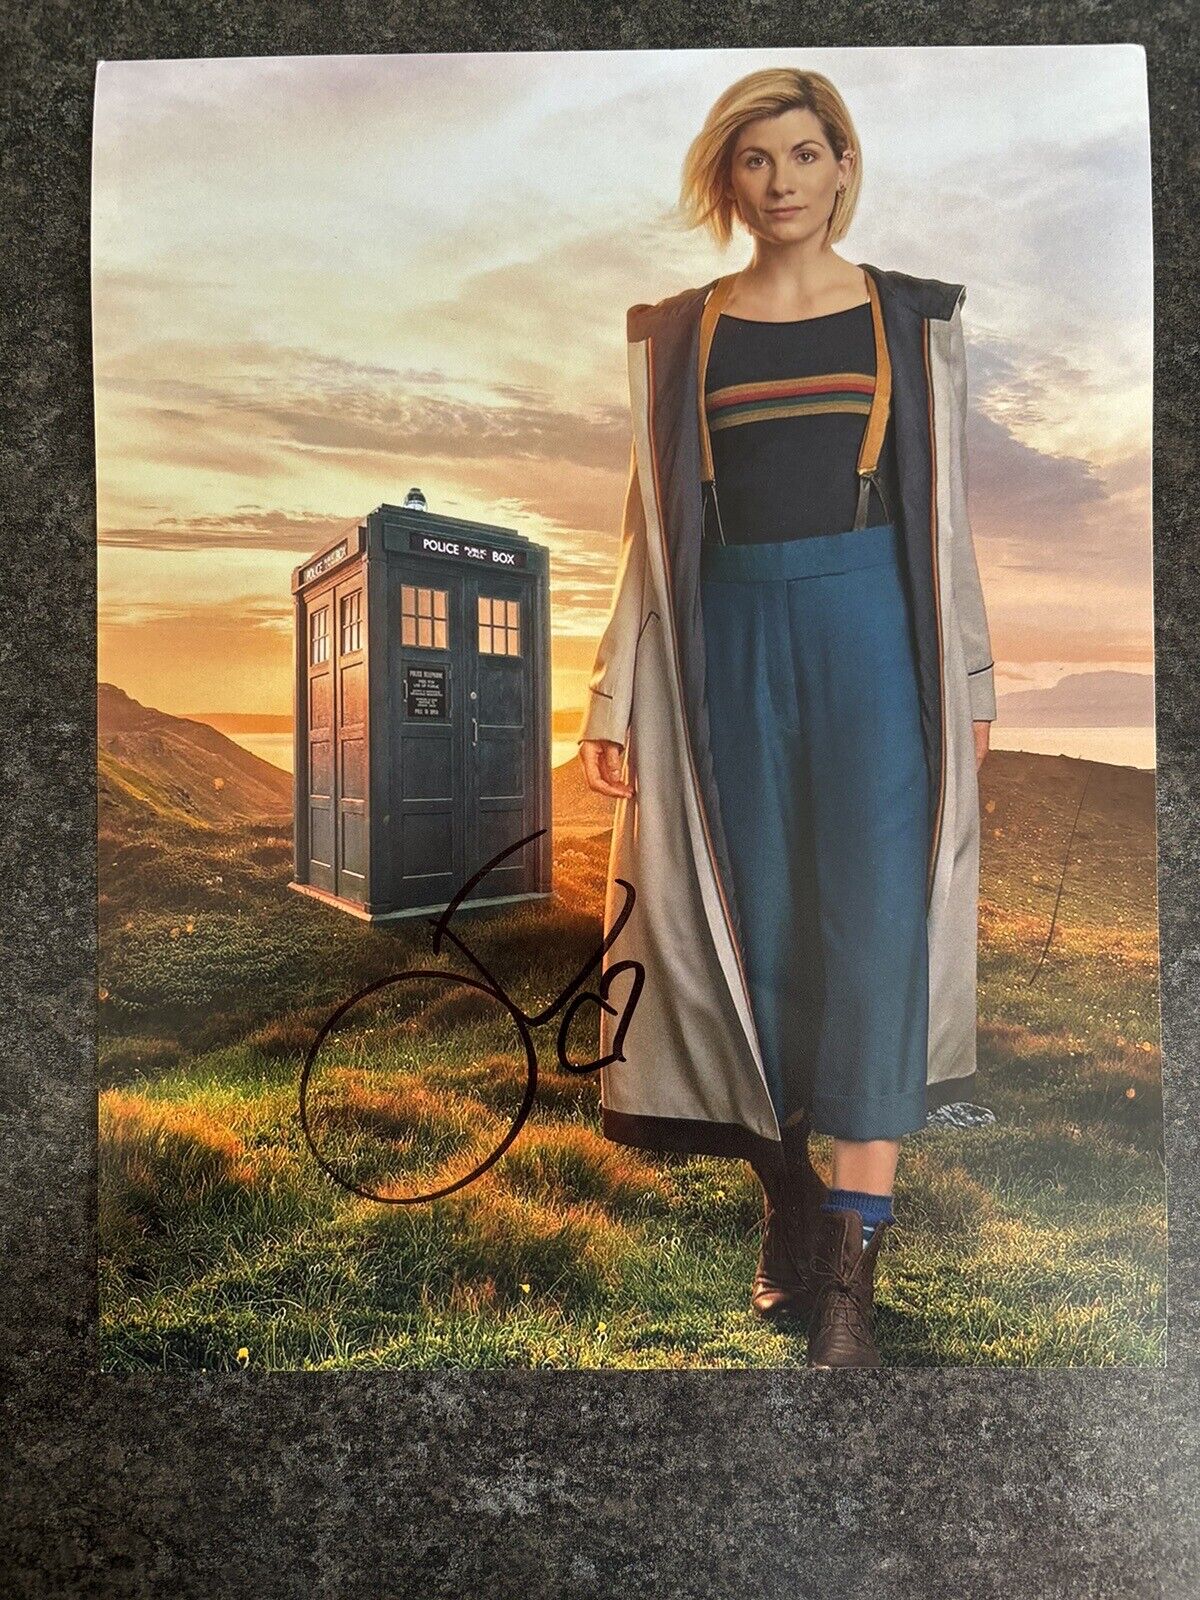 Hand Signed Jodie Whitaker 10x8 Doctor Who Photo With COA